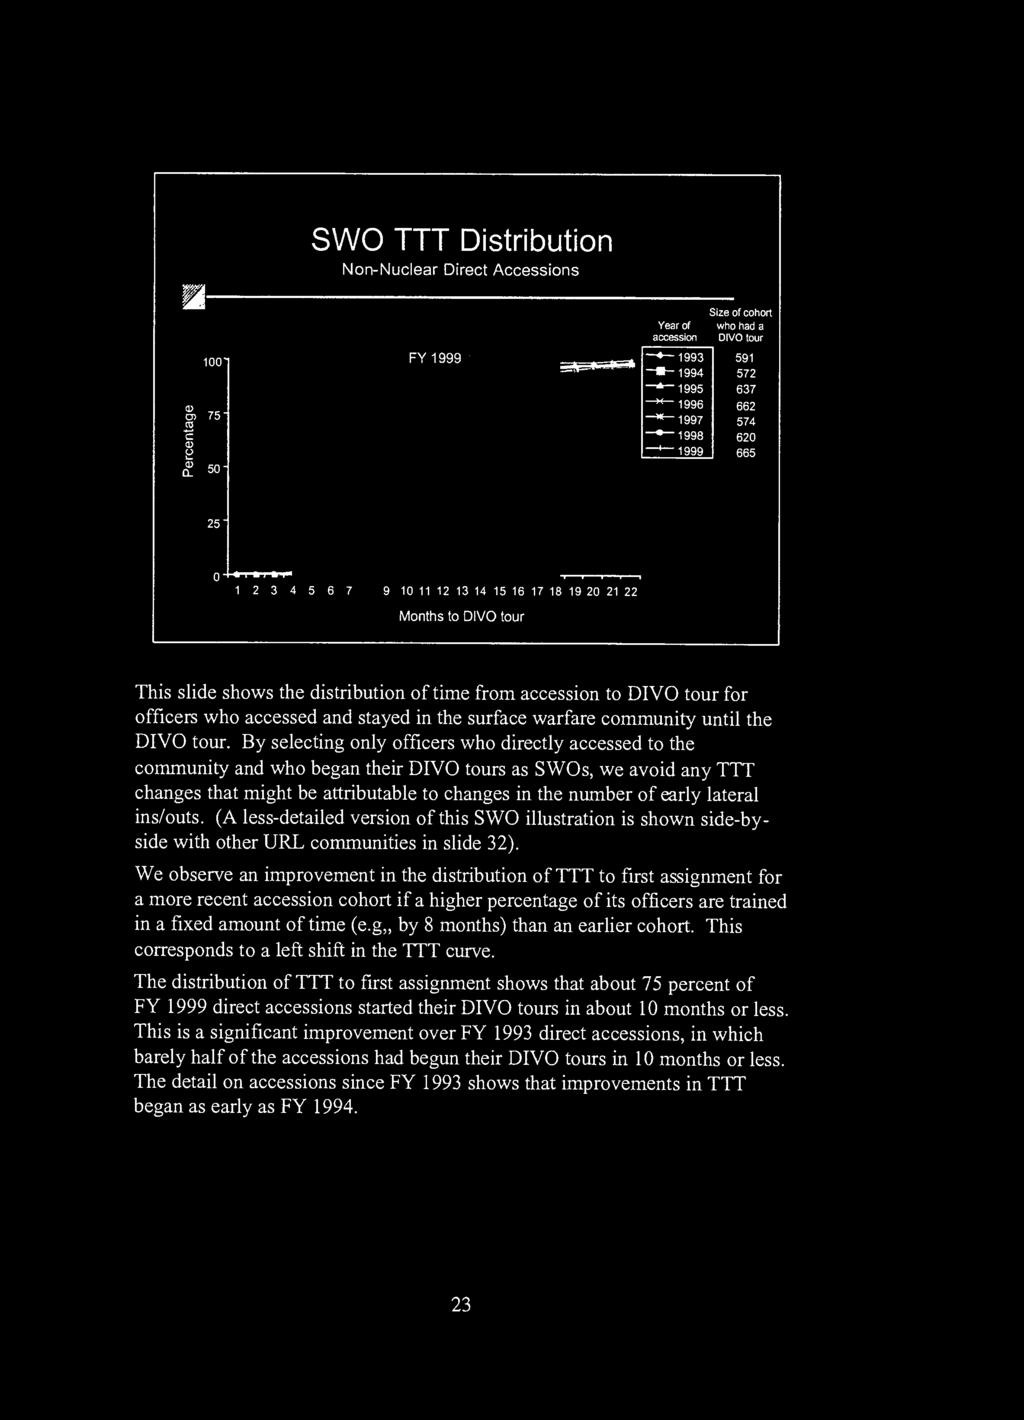 SWO TTT Distribution Non-Nuclear Direct Accessions 100 50 FY1999 Year of accession Size of cohort who had a OIVO tour 1993 591 - -1994 572 -*-1995 637 * 1996 662 * 199/ 574 - -1998 620 ^ 1999 665 25